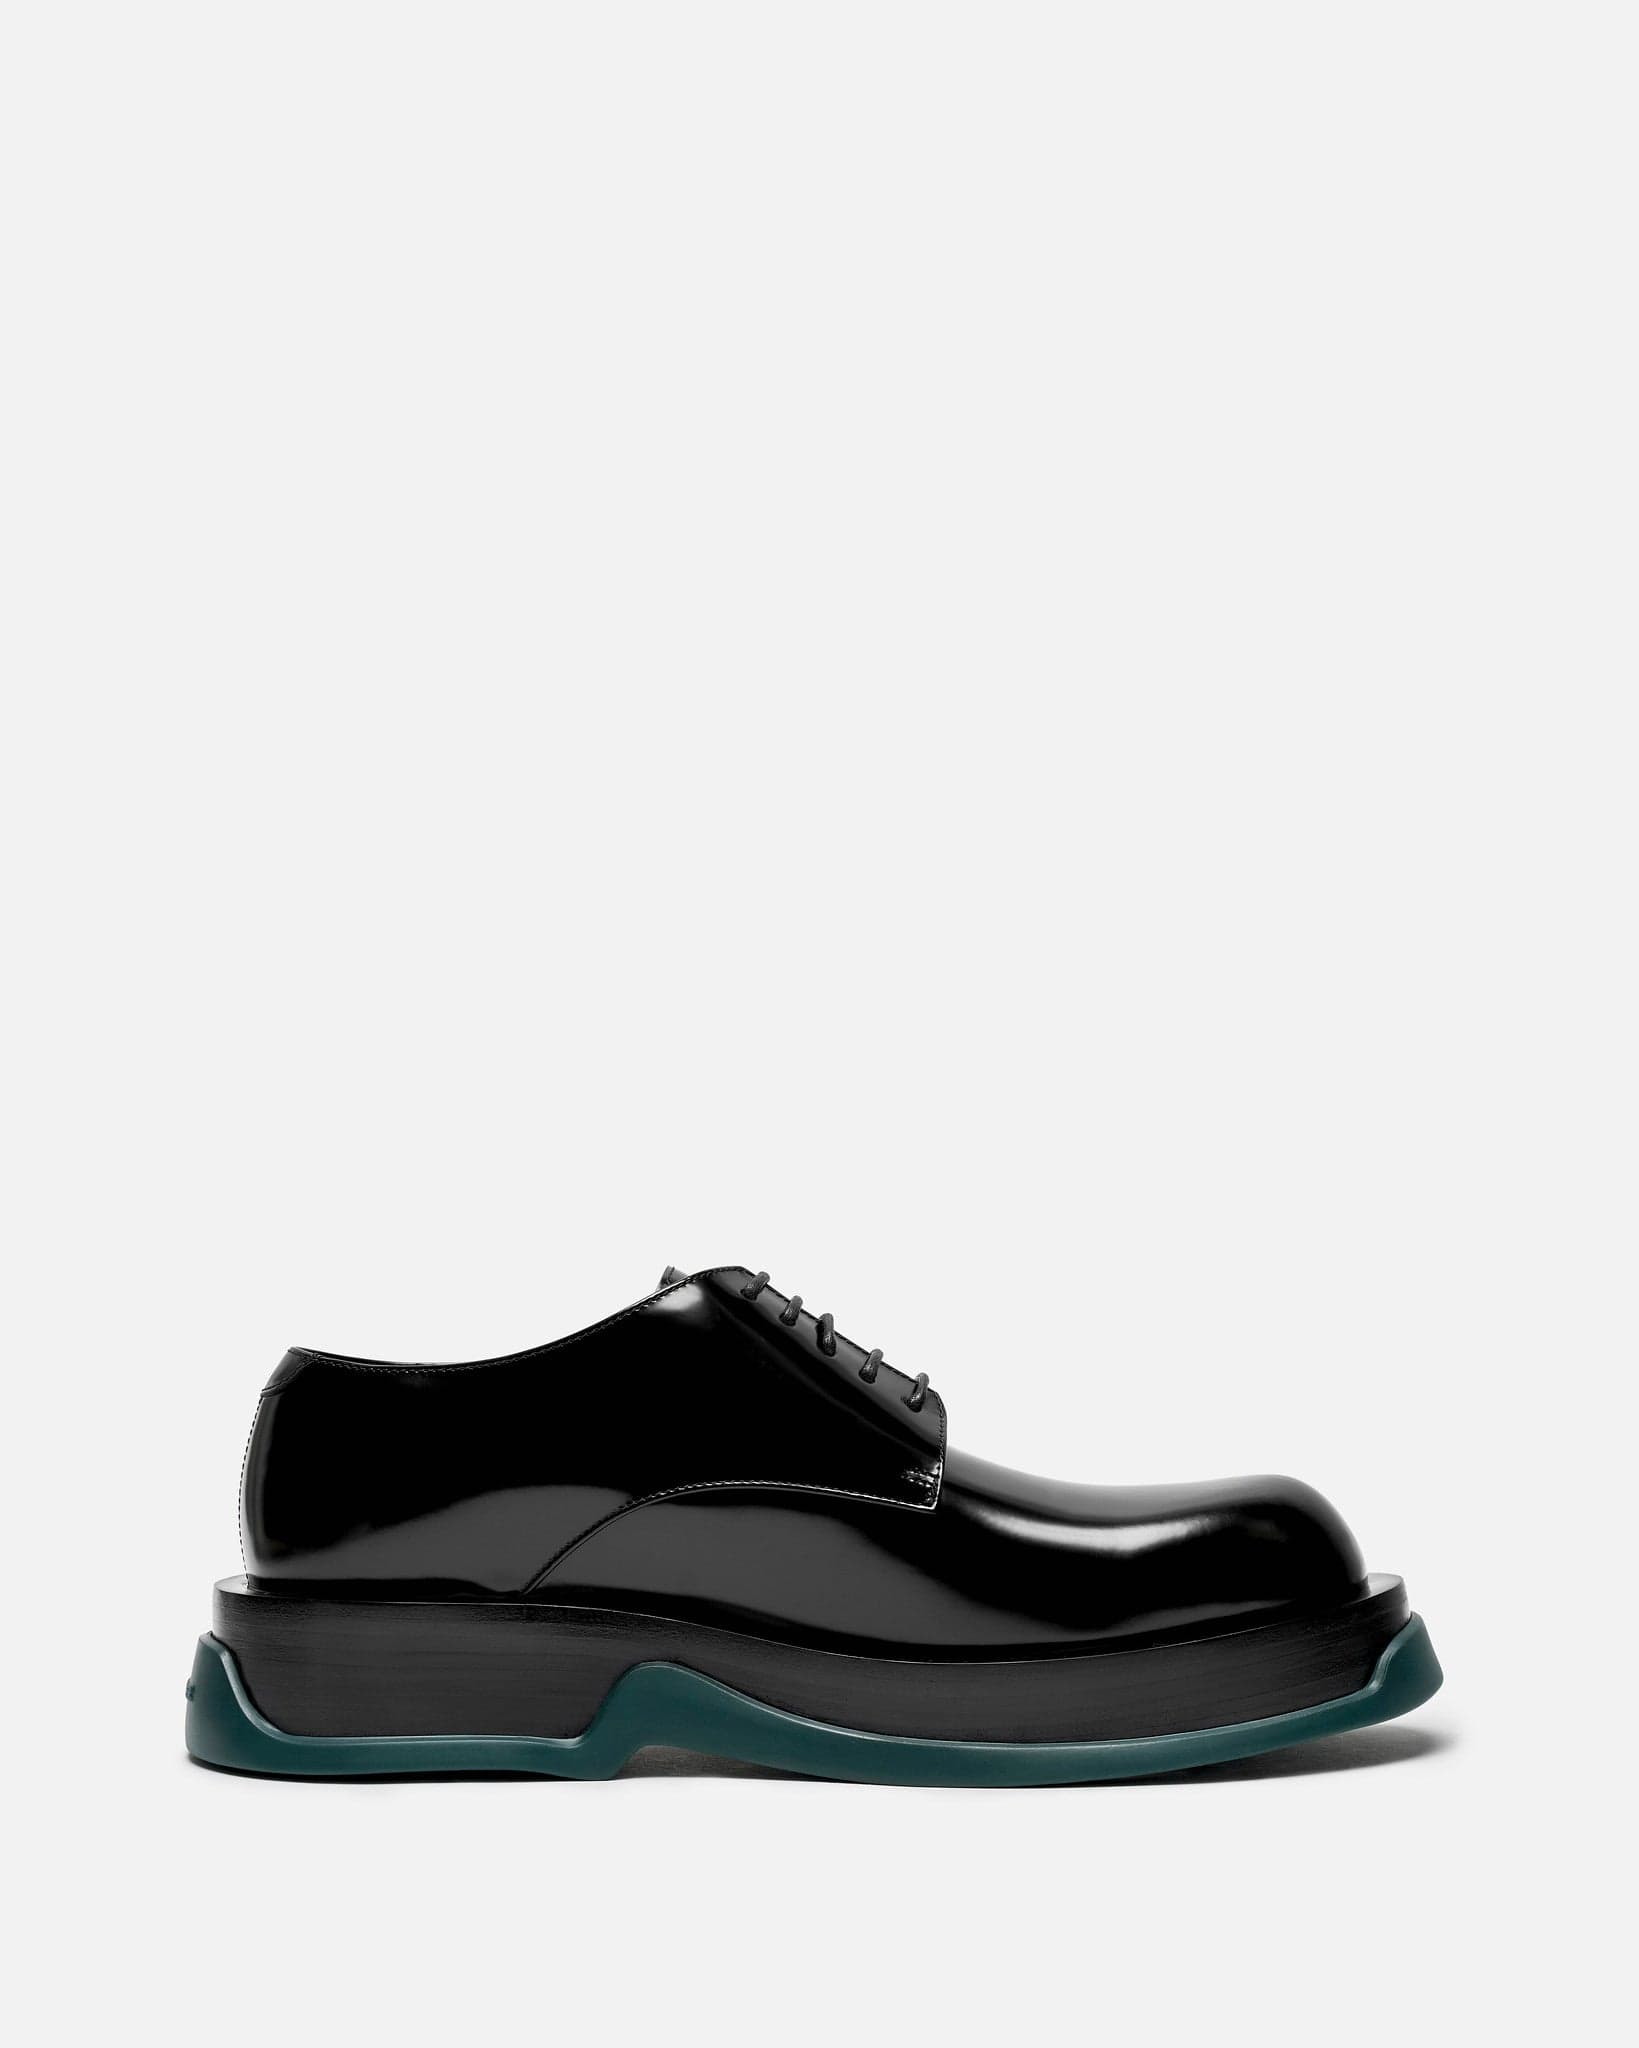 Spazzolato Calf Leather Shoe in After Eight